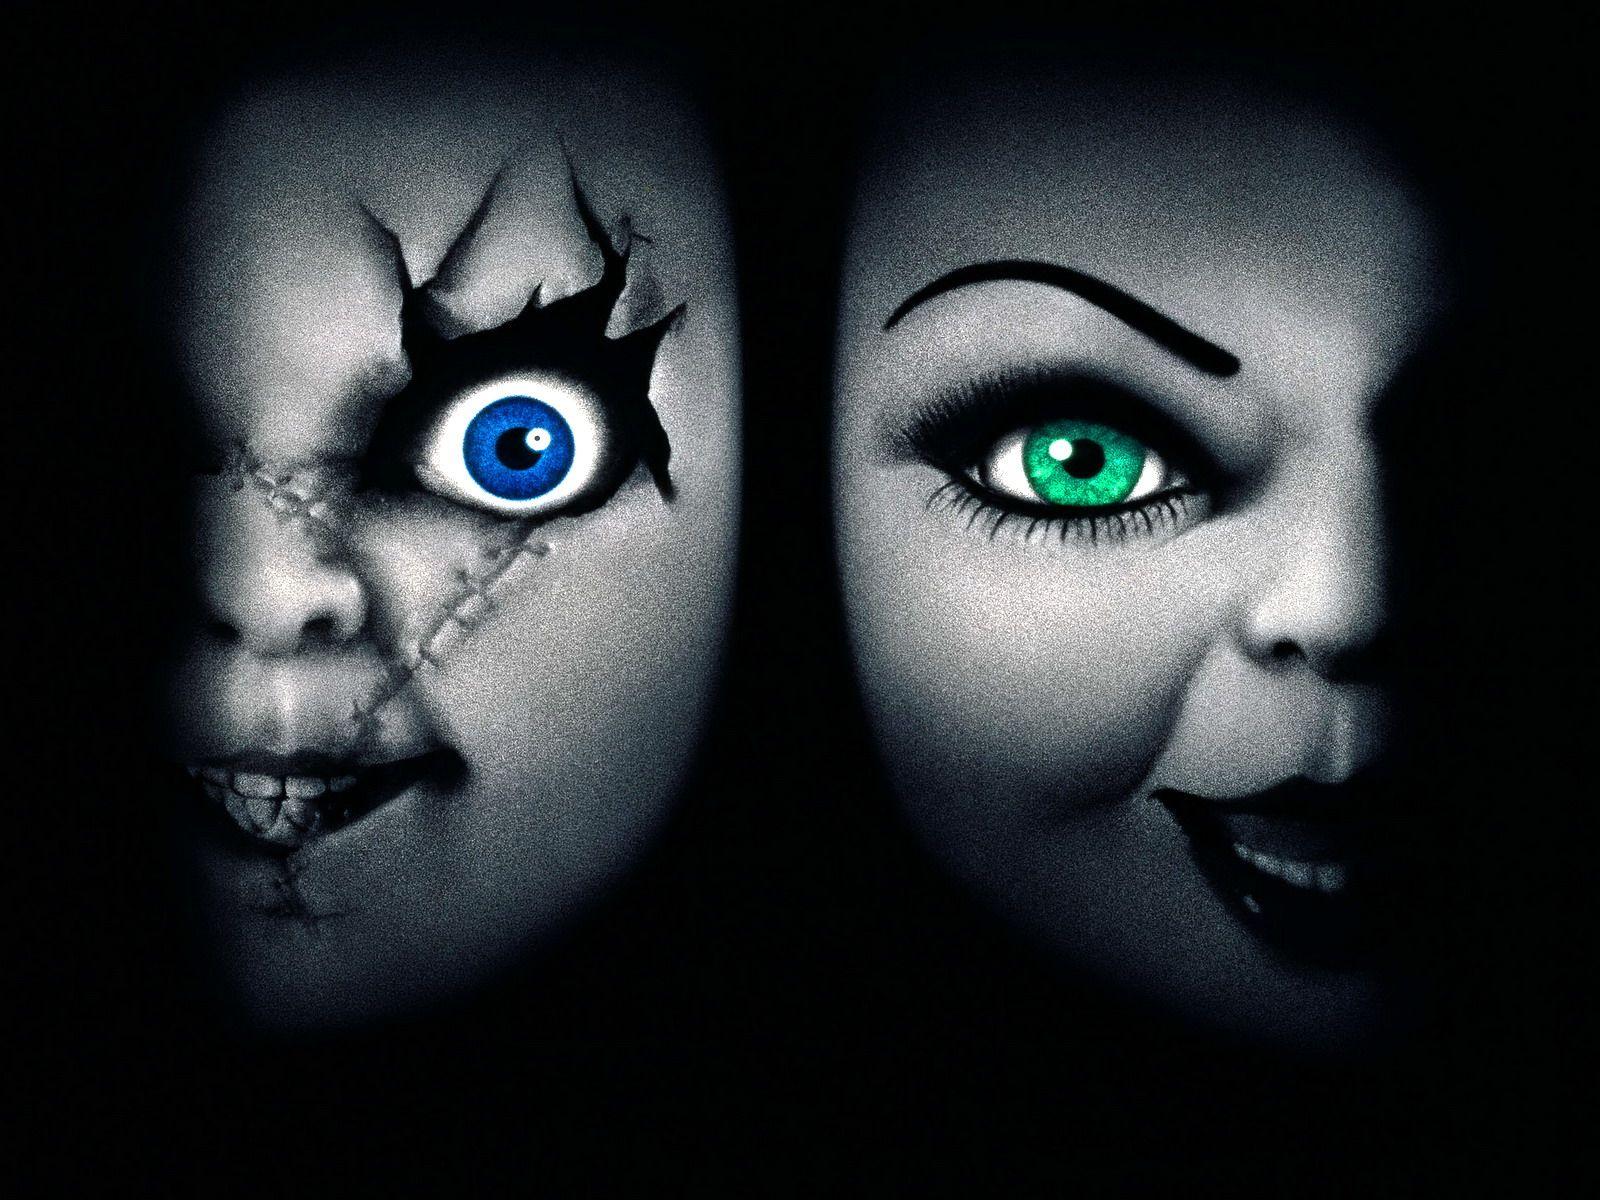 Bride Of Chucky Wallpapers and Backgrounds Image.